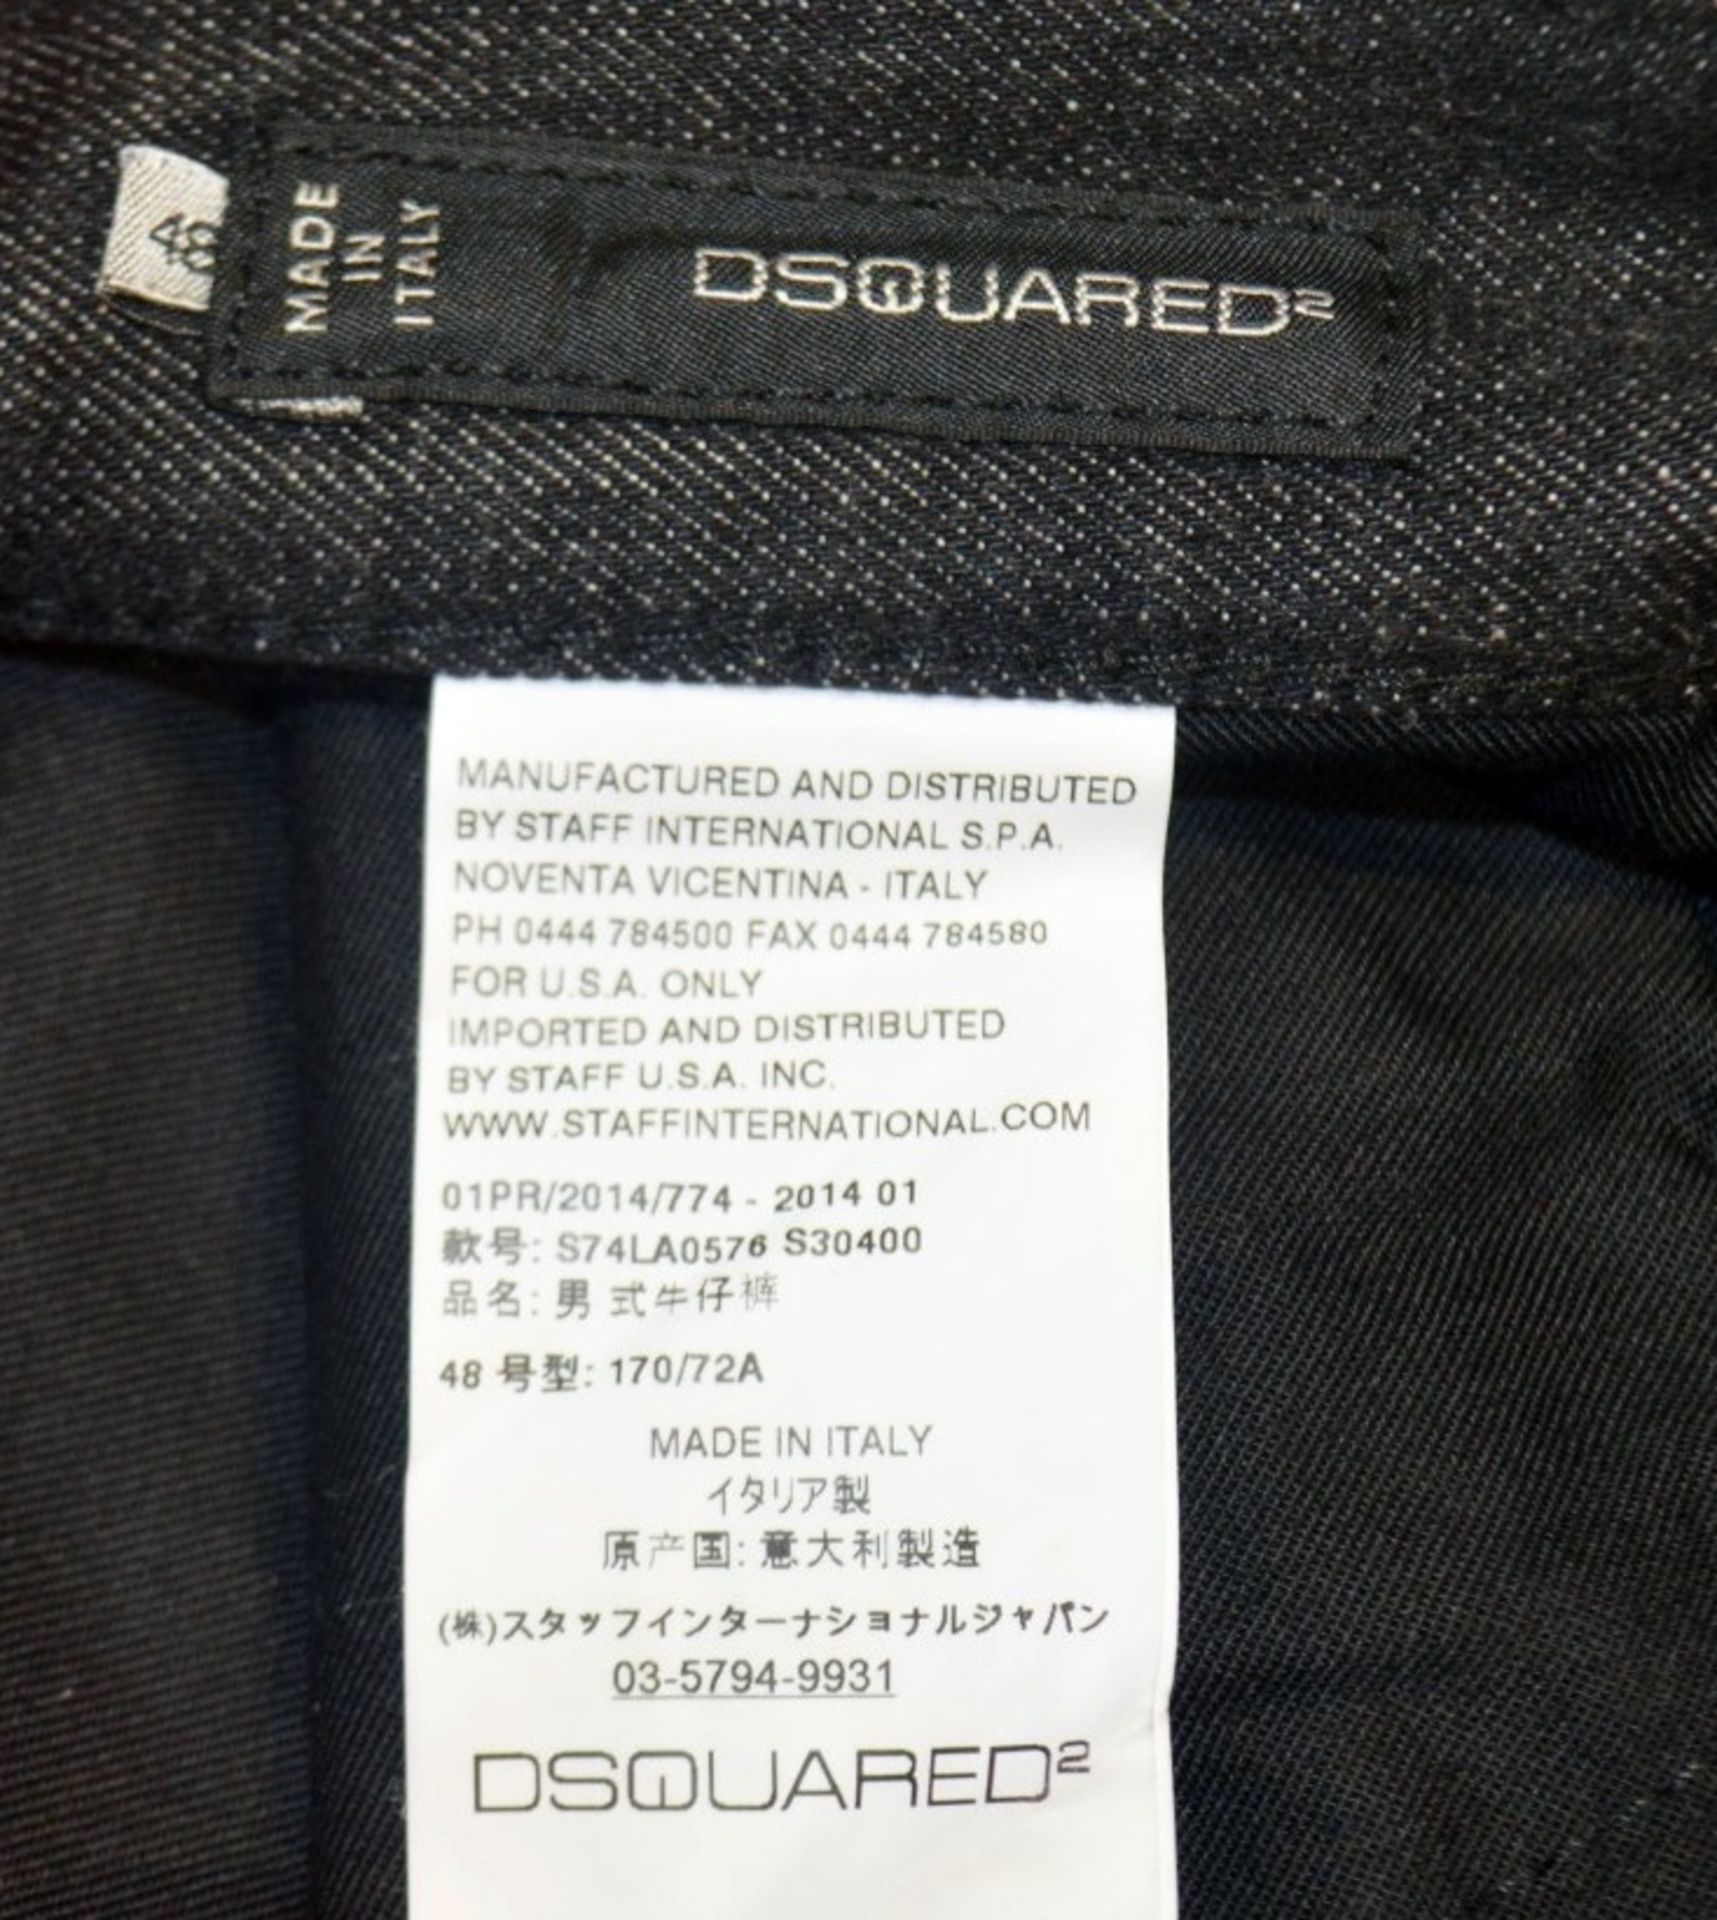 1 x Pair Of Men's Genuine Dsquared2 Distressed-Style Jeans In Washed Black - Waist Size: EU48 / UK30 - Image 2 of 8